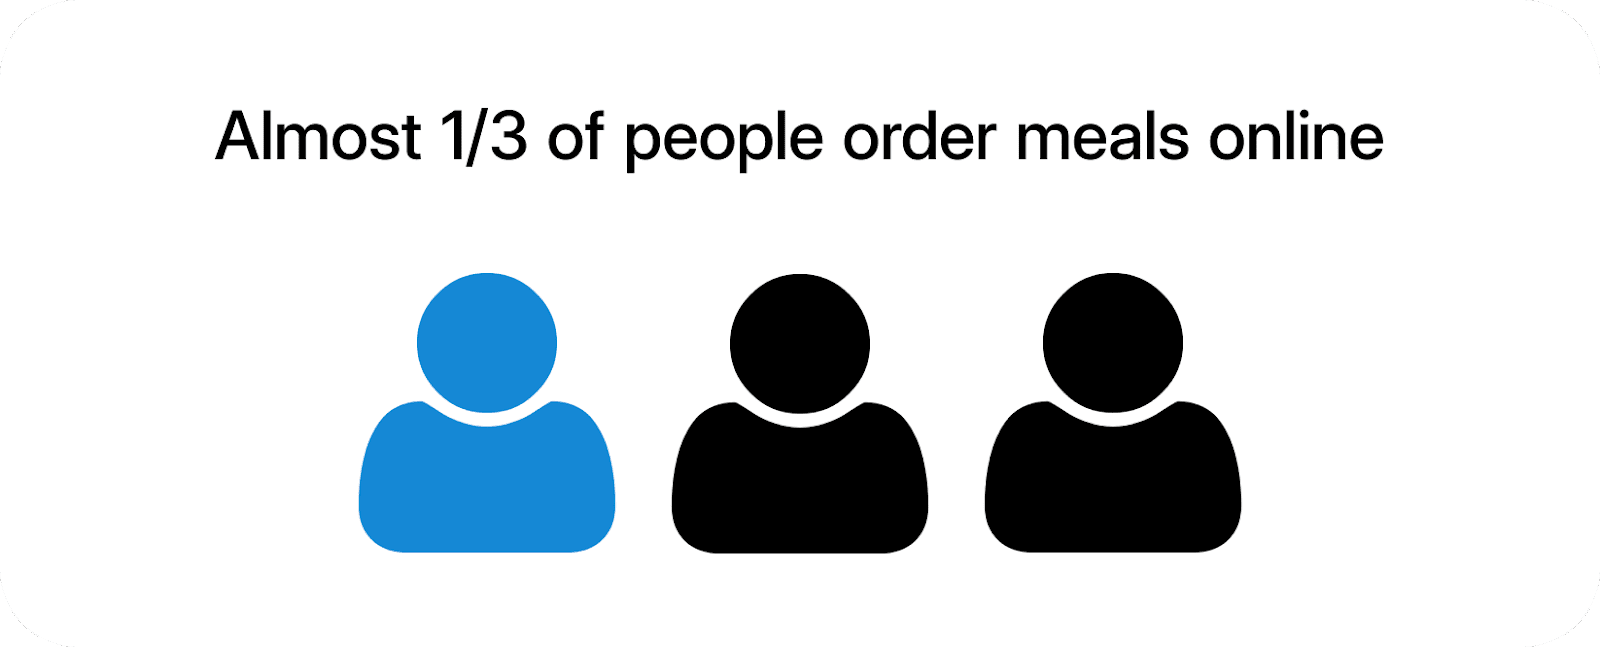 Almost 1/3 of people order meals online